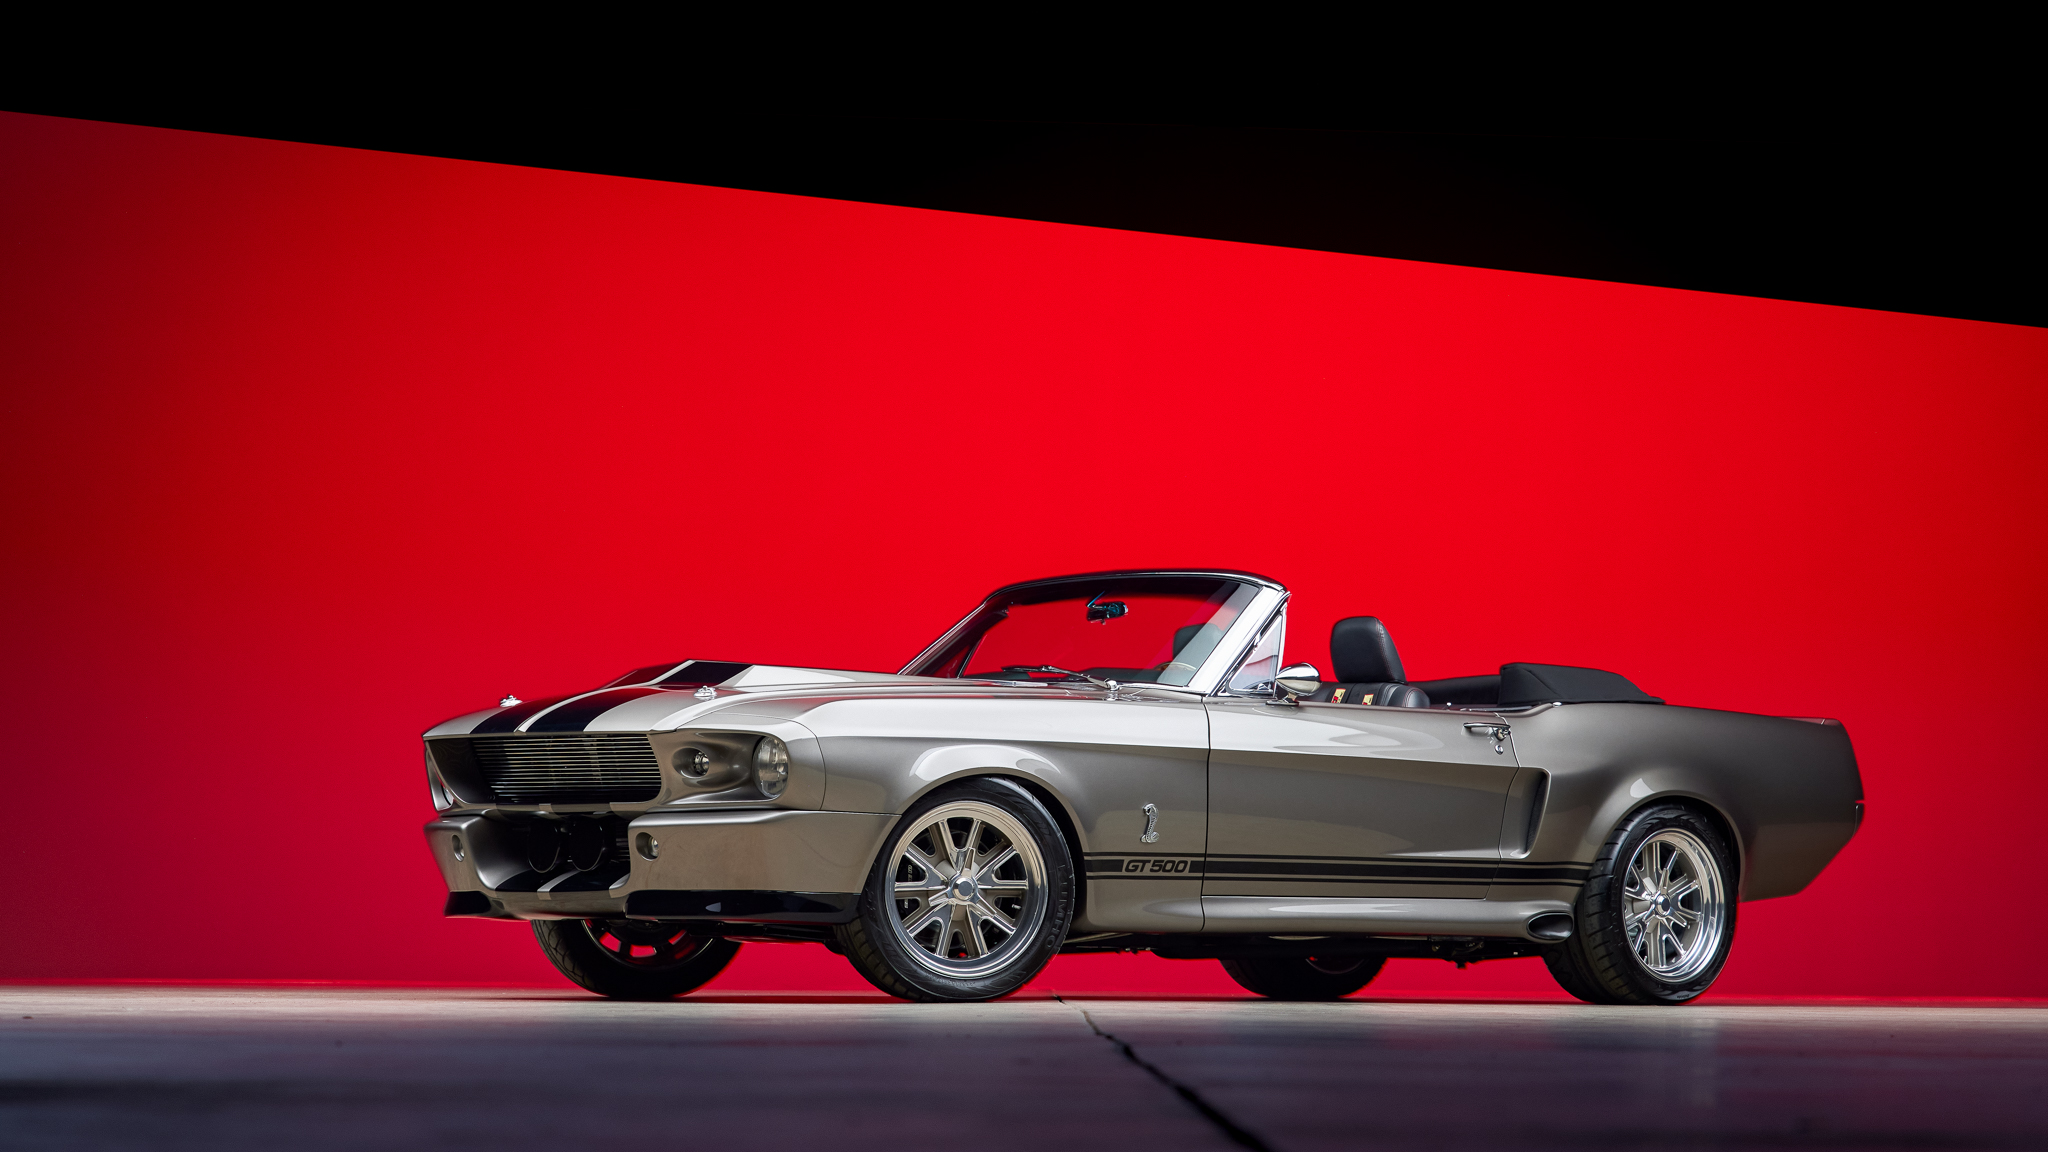 Used 427-Powered 1968 Ford Mustang Convertible 5-Speed Review